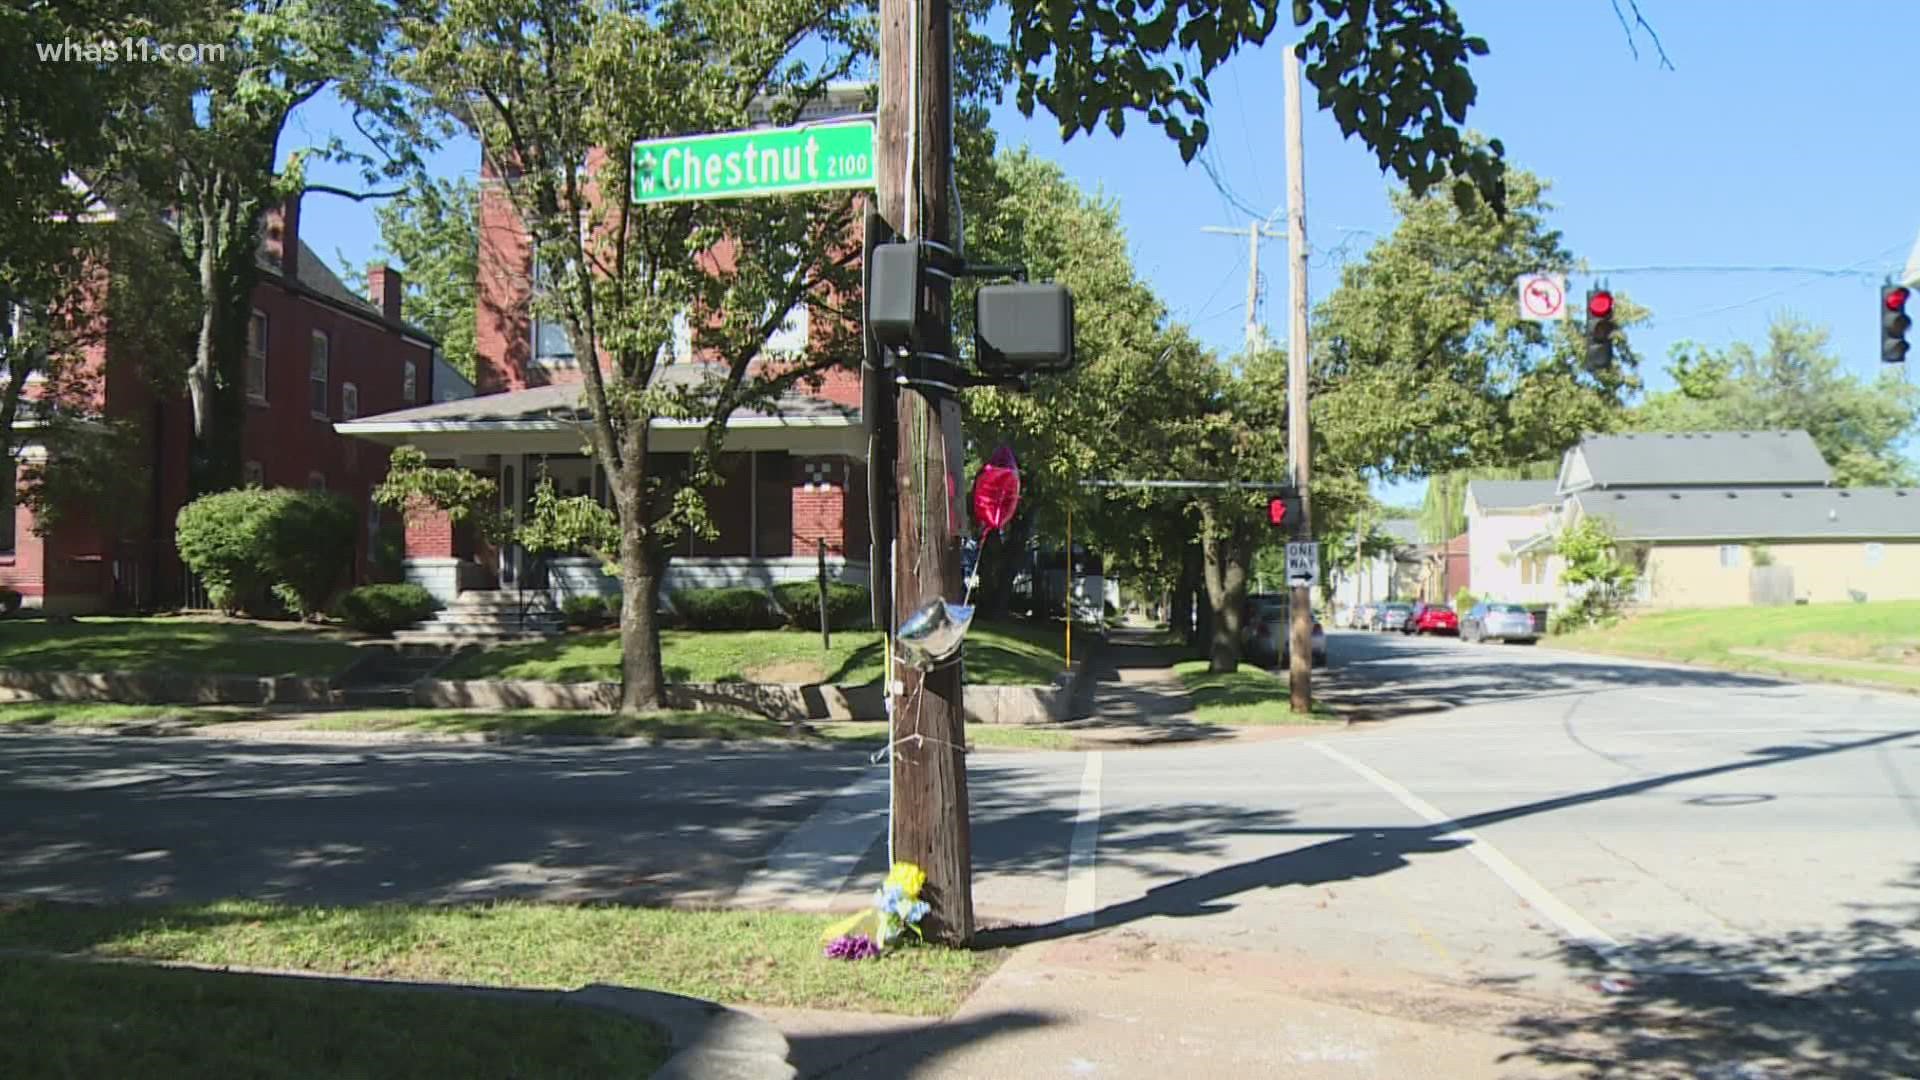 Days after 16-year-old Tyree Smith was shot while standing on a bus stop in the Russell neighborhood, neighbors react after a light has been finally fixed.